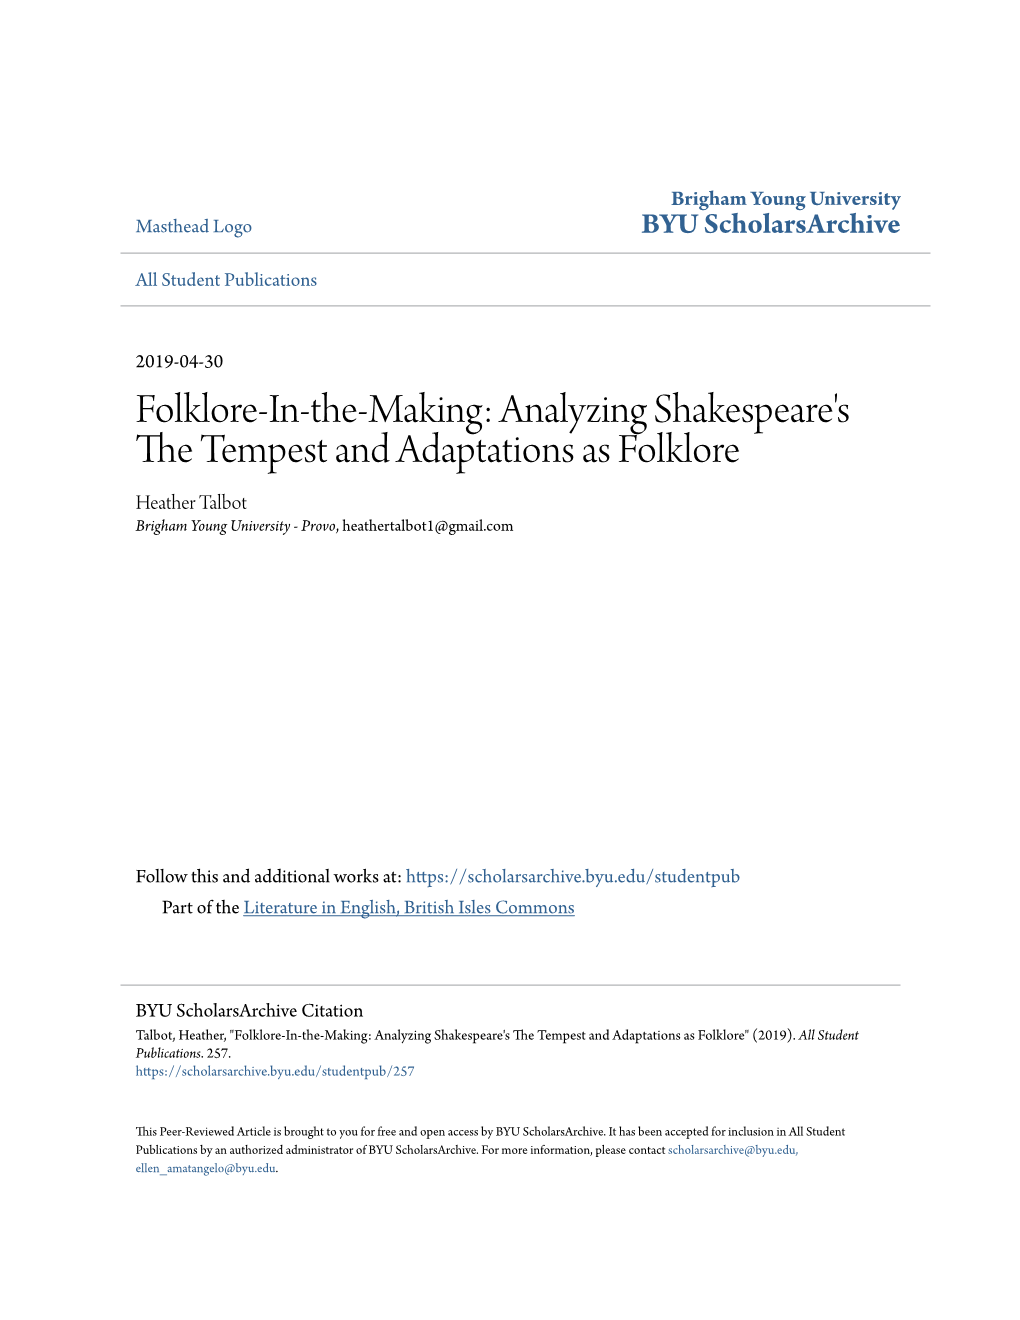 Analyzing Shakespeare's the Tempest and Adaptations As Folklore